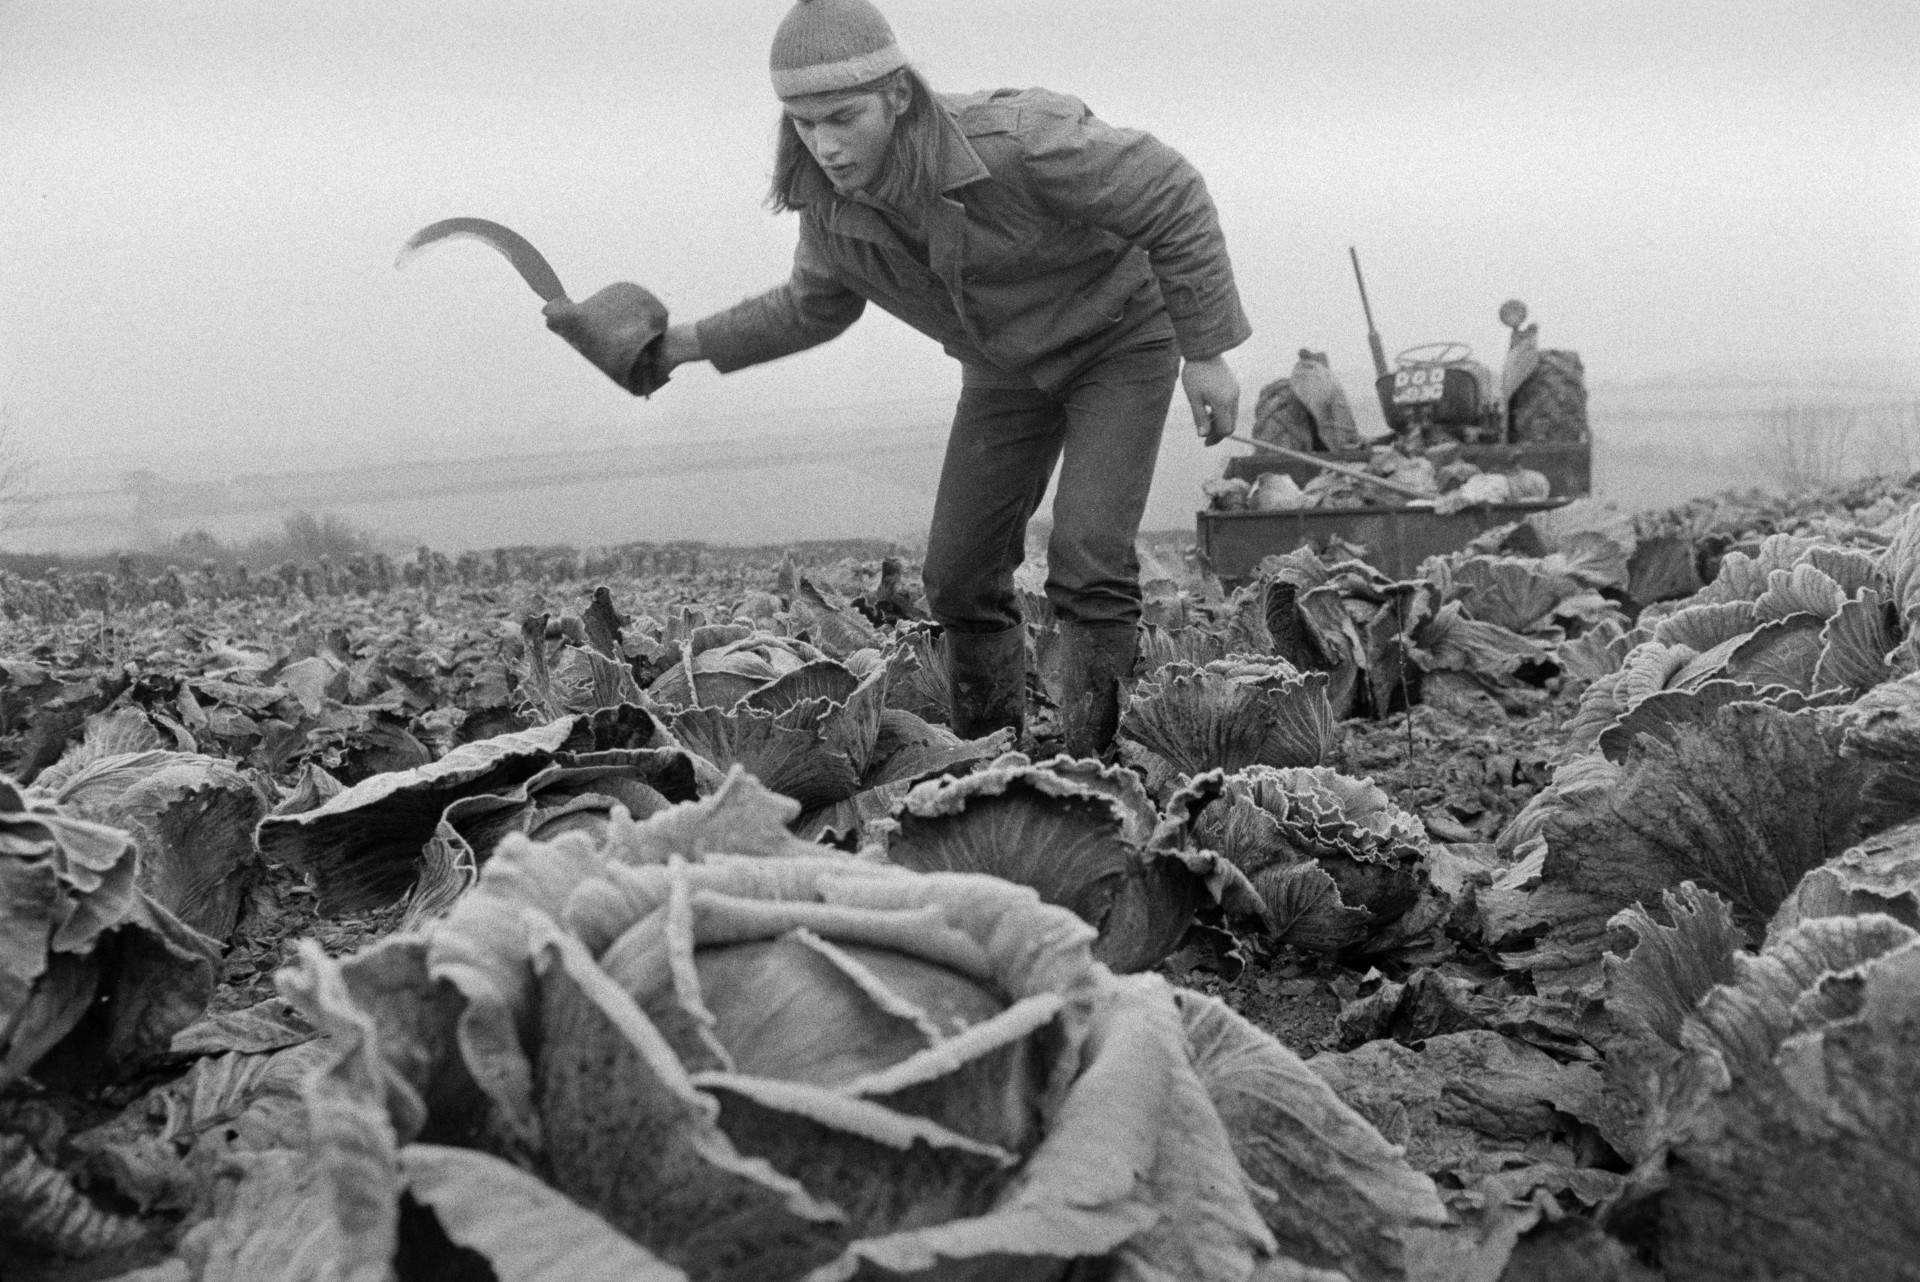 Derek Bright cutting flatpole cabbages in a field at Mill Road Farm, Beaford, with a bill hook. The cabbages are for cattle feed. The farm was also known as Jeffrys.